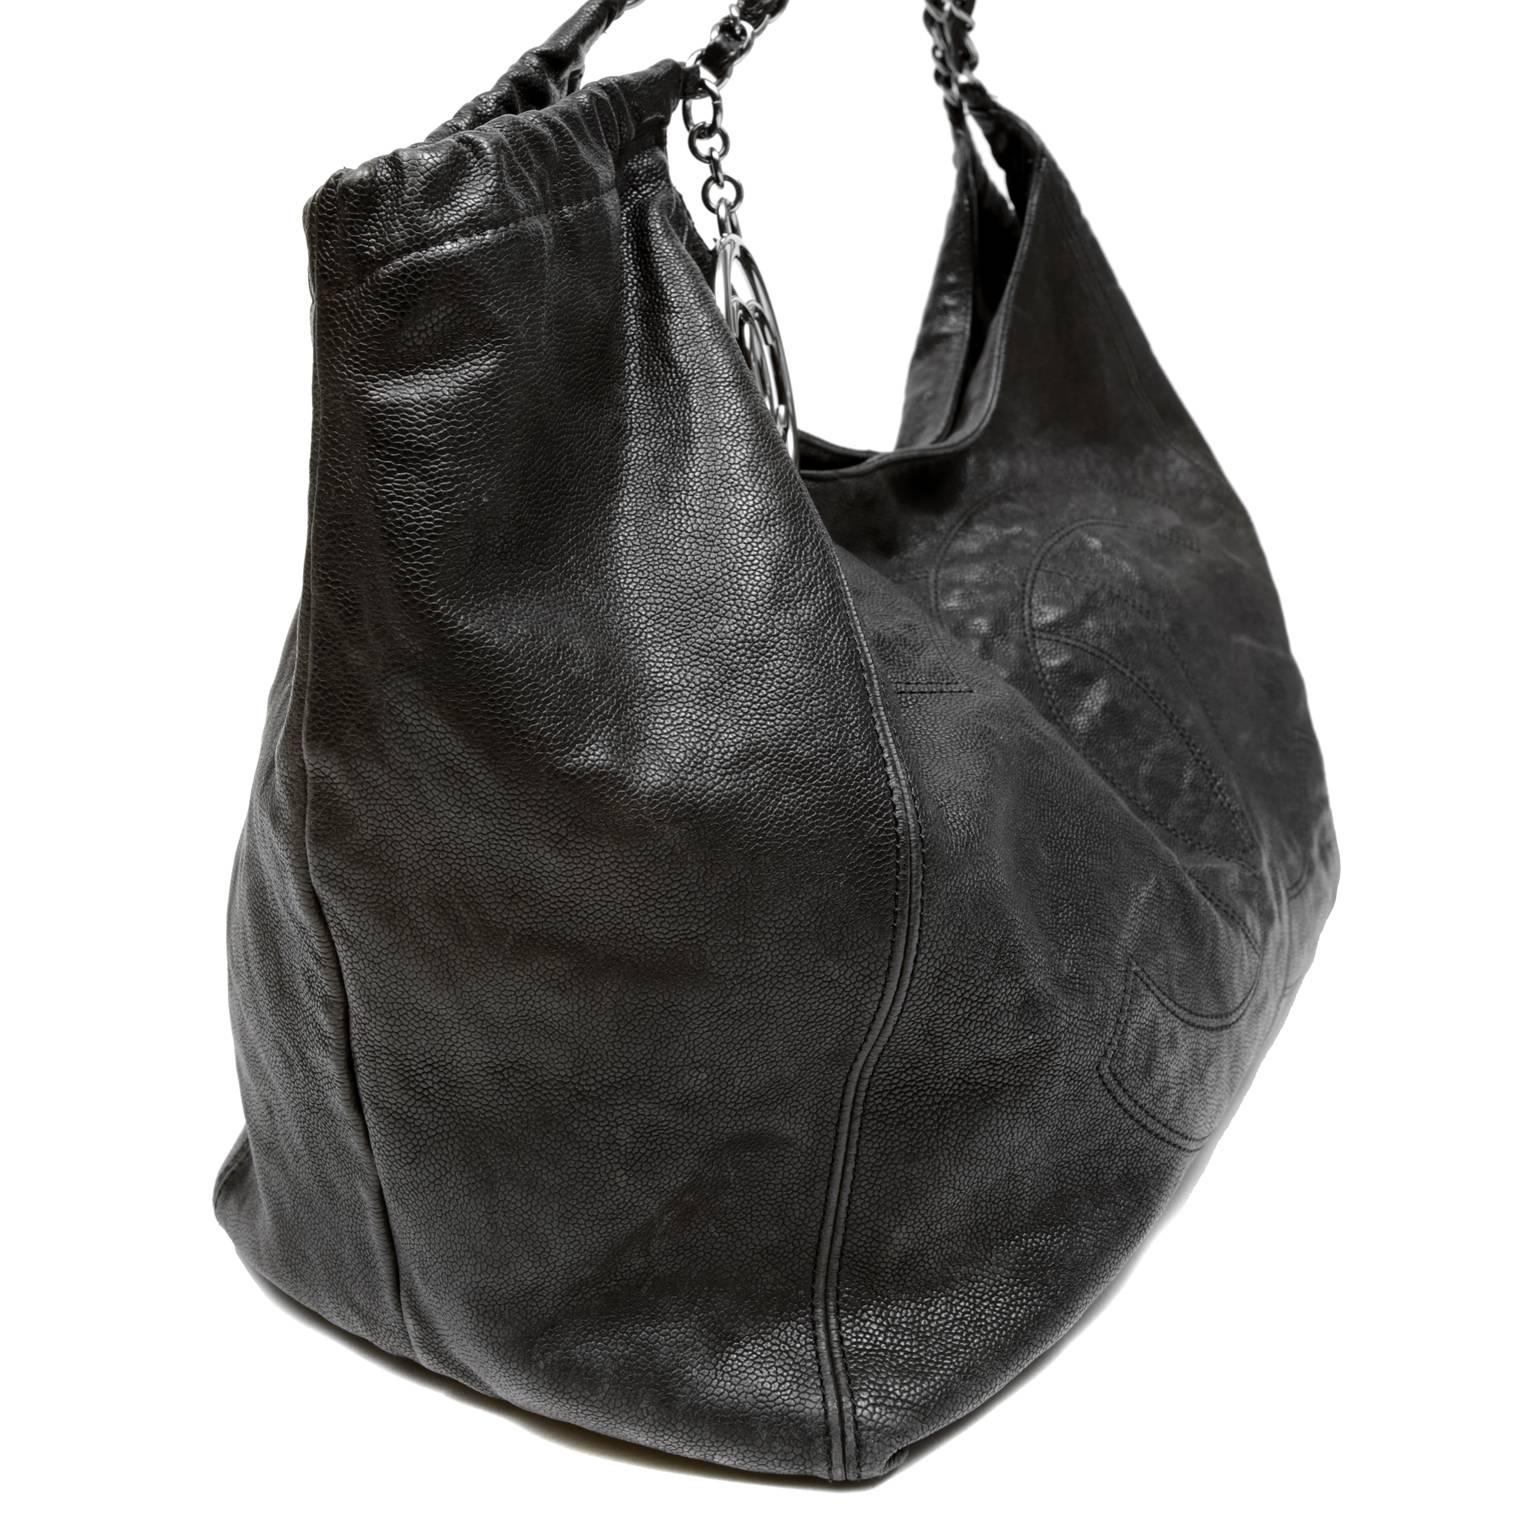 Chanel Black Caviar Coco Cabas Tote- EXCELLENT PLUS
The highly coveted style sold out everywhere and remains a fabulous everyday piece for any collection.  
Intentionally distressed black caviar leather is textured and durable.  Colossal